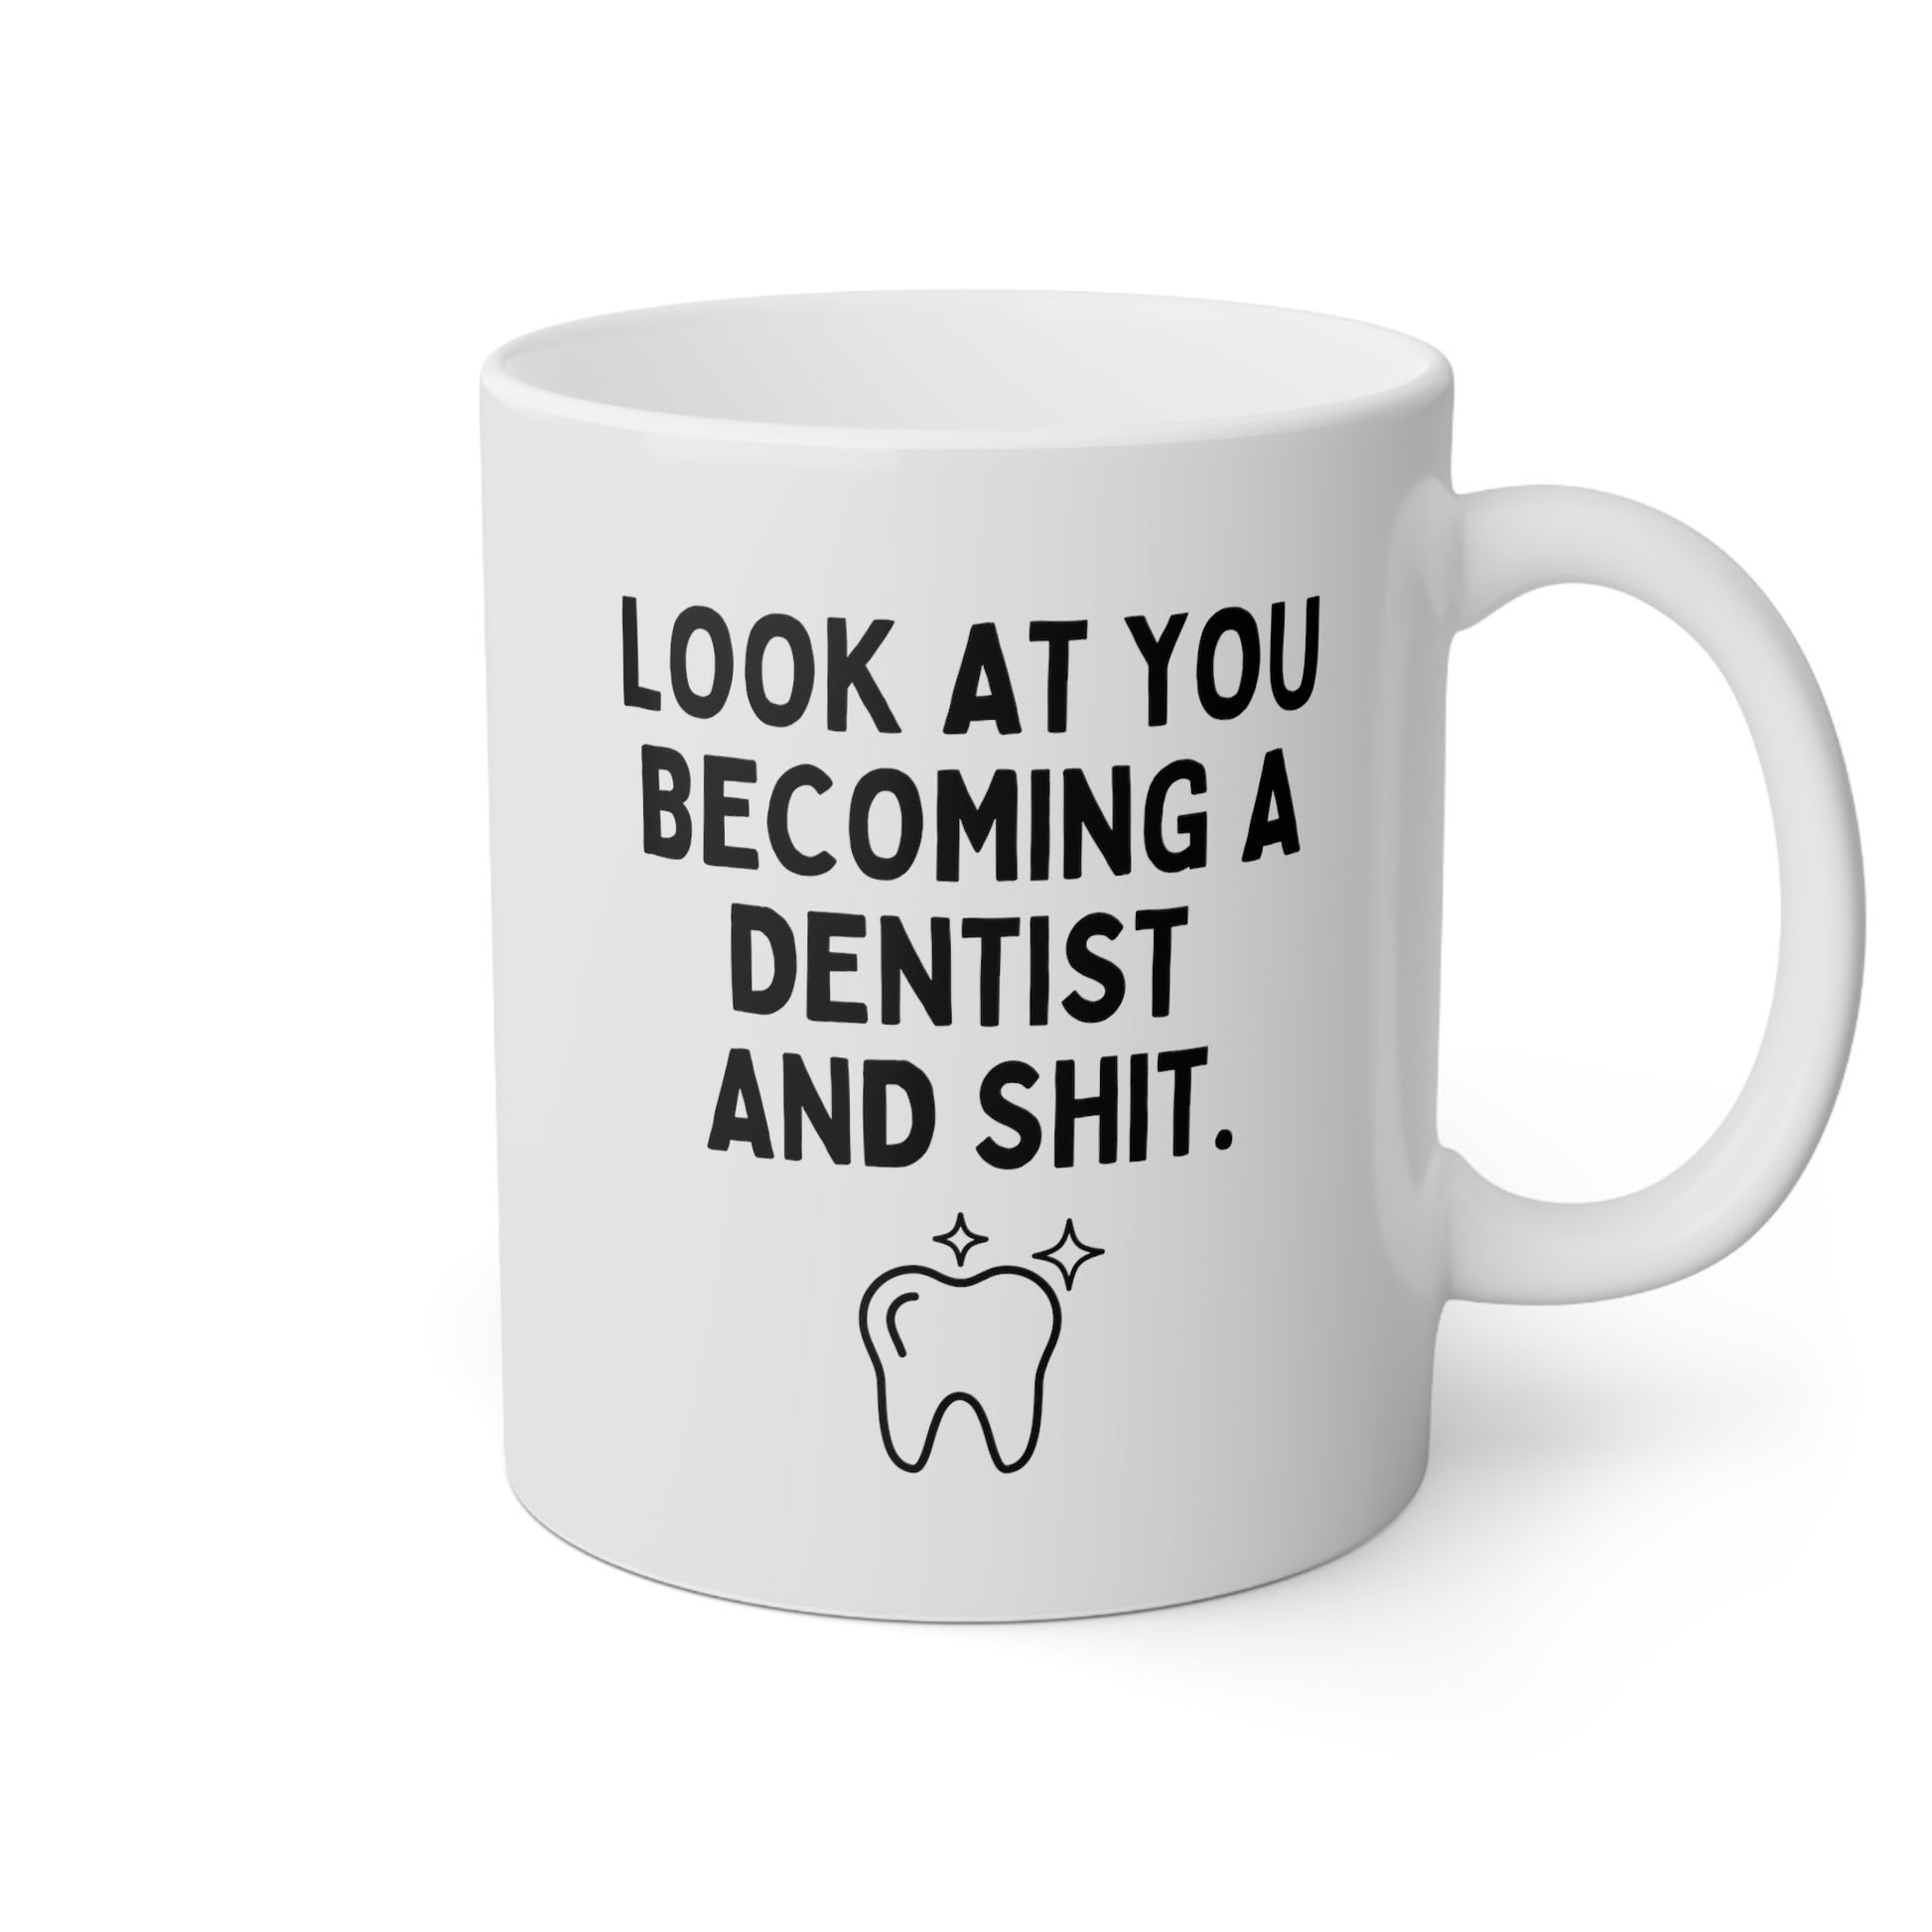 Look At You Becoming A Dentist And Shit 11oz white funny large coffee mug gift for dentist to be new dental graduate dentistry tooth waveywares wavey wares wavywares wavy wares